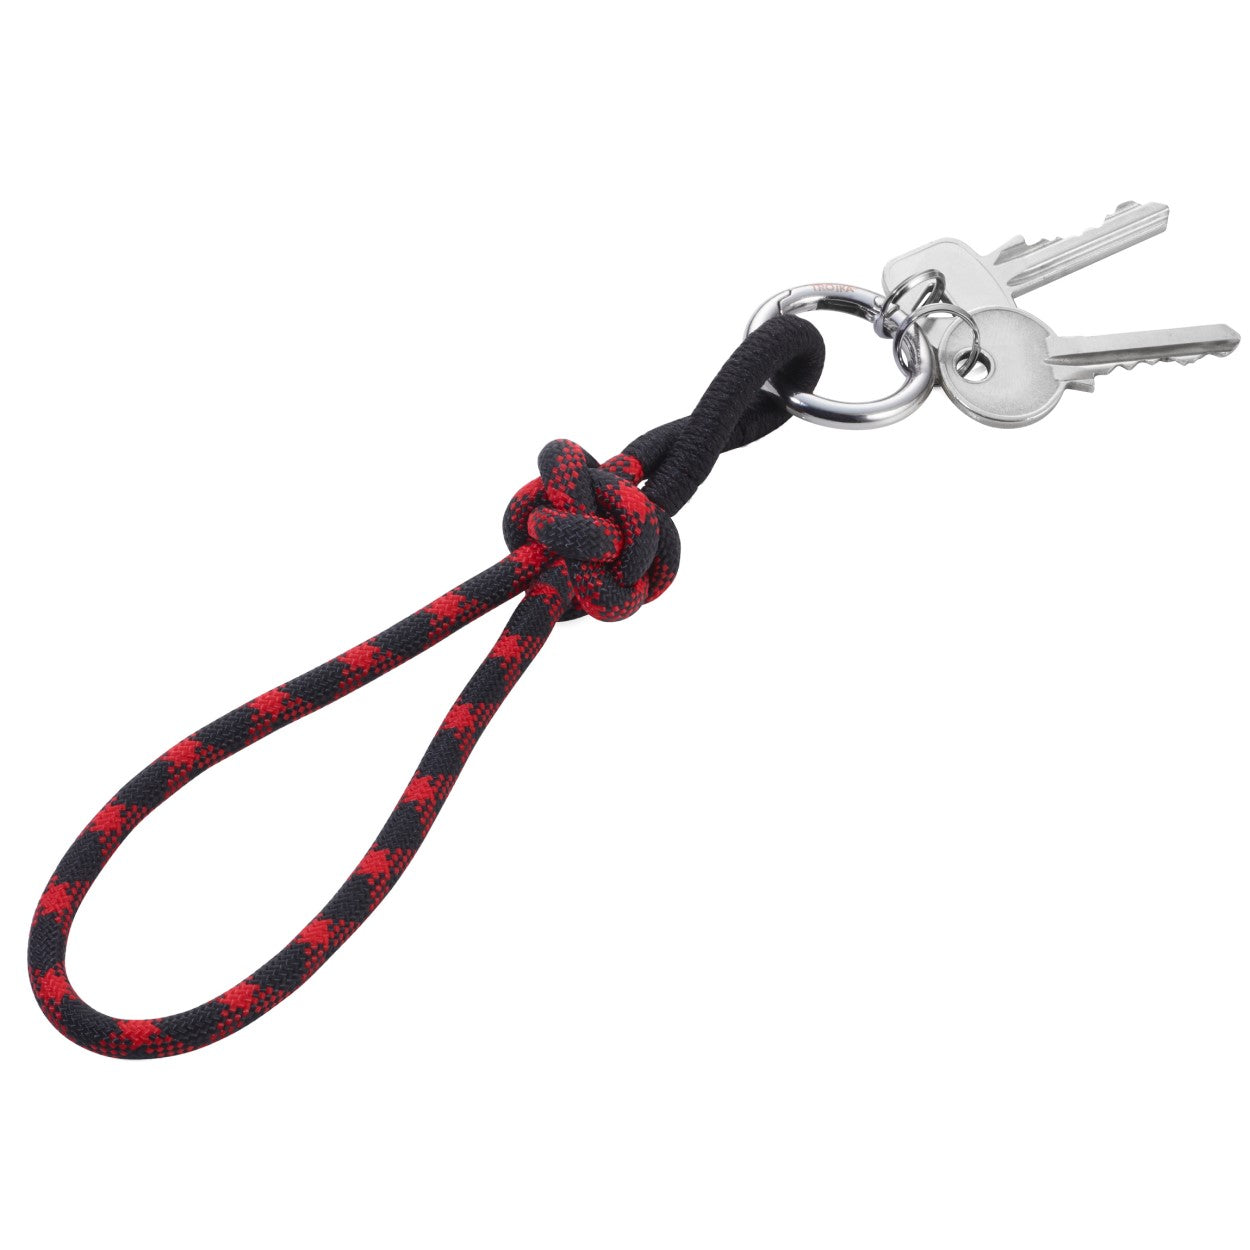 TROIKA Keyring Sail Rope with Decorative Knot CORDULA – Red and Black